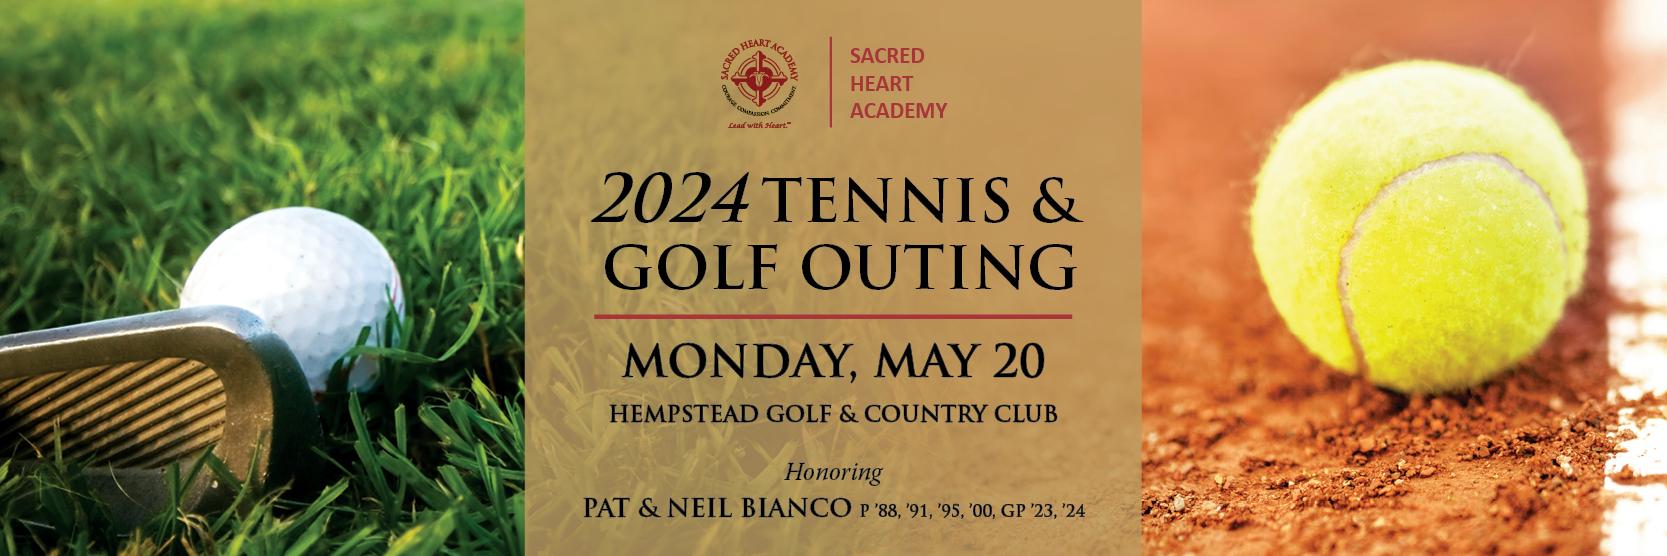 sha tennis and golf outing 2024